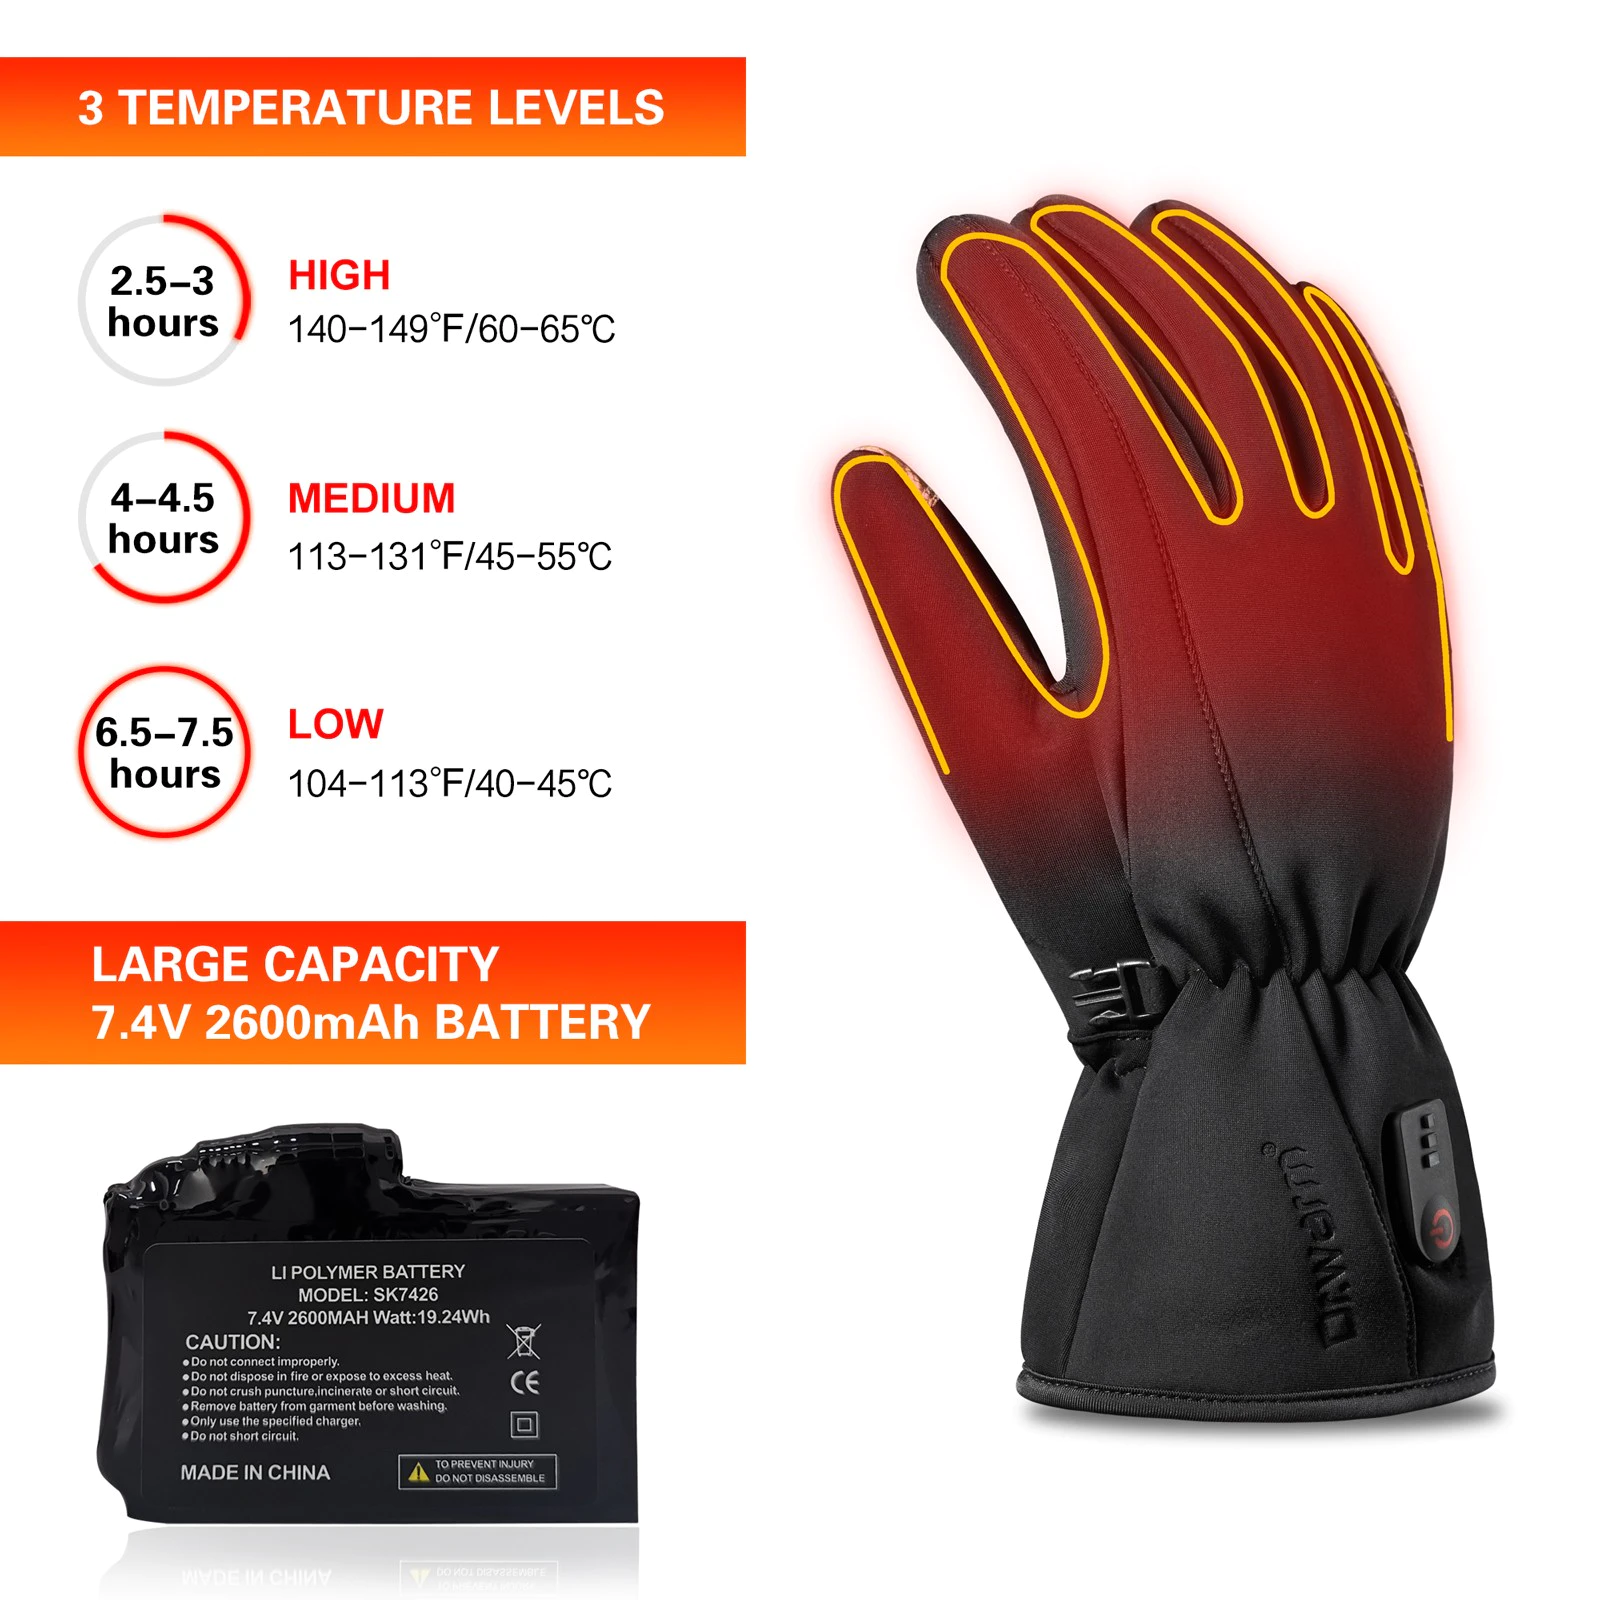 Dr. Warm high quality electrical hand gloves improves blood circulation for ice house